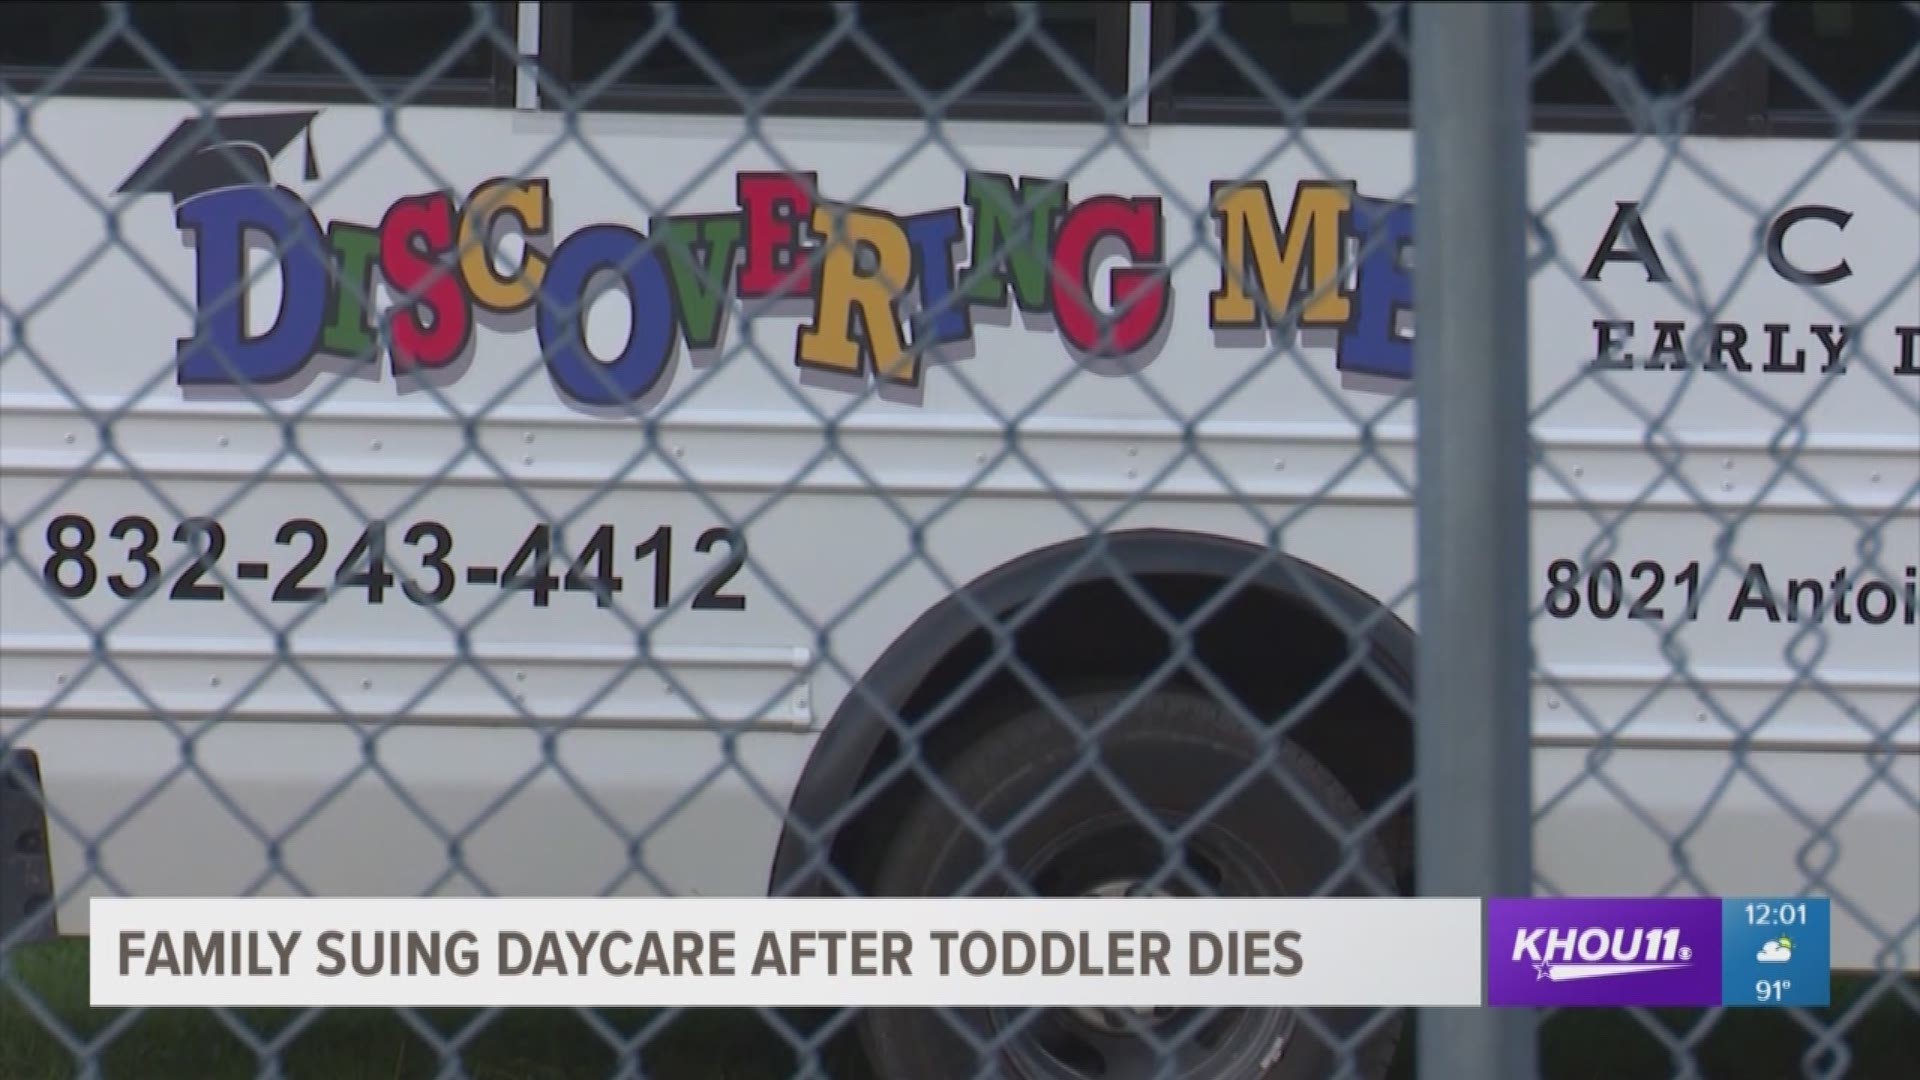 The family of a toddler who died after being left in a hot daycare van is suing the childcare center. 